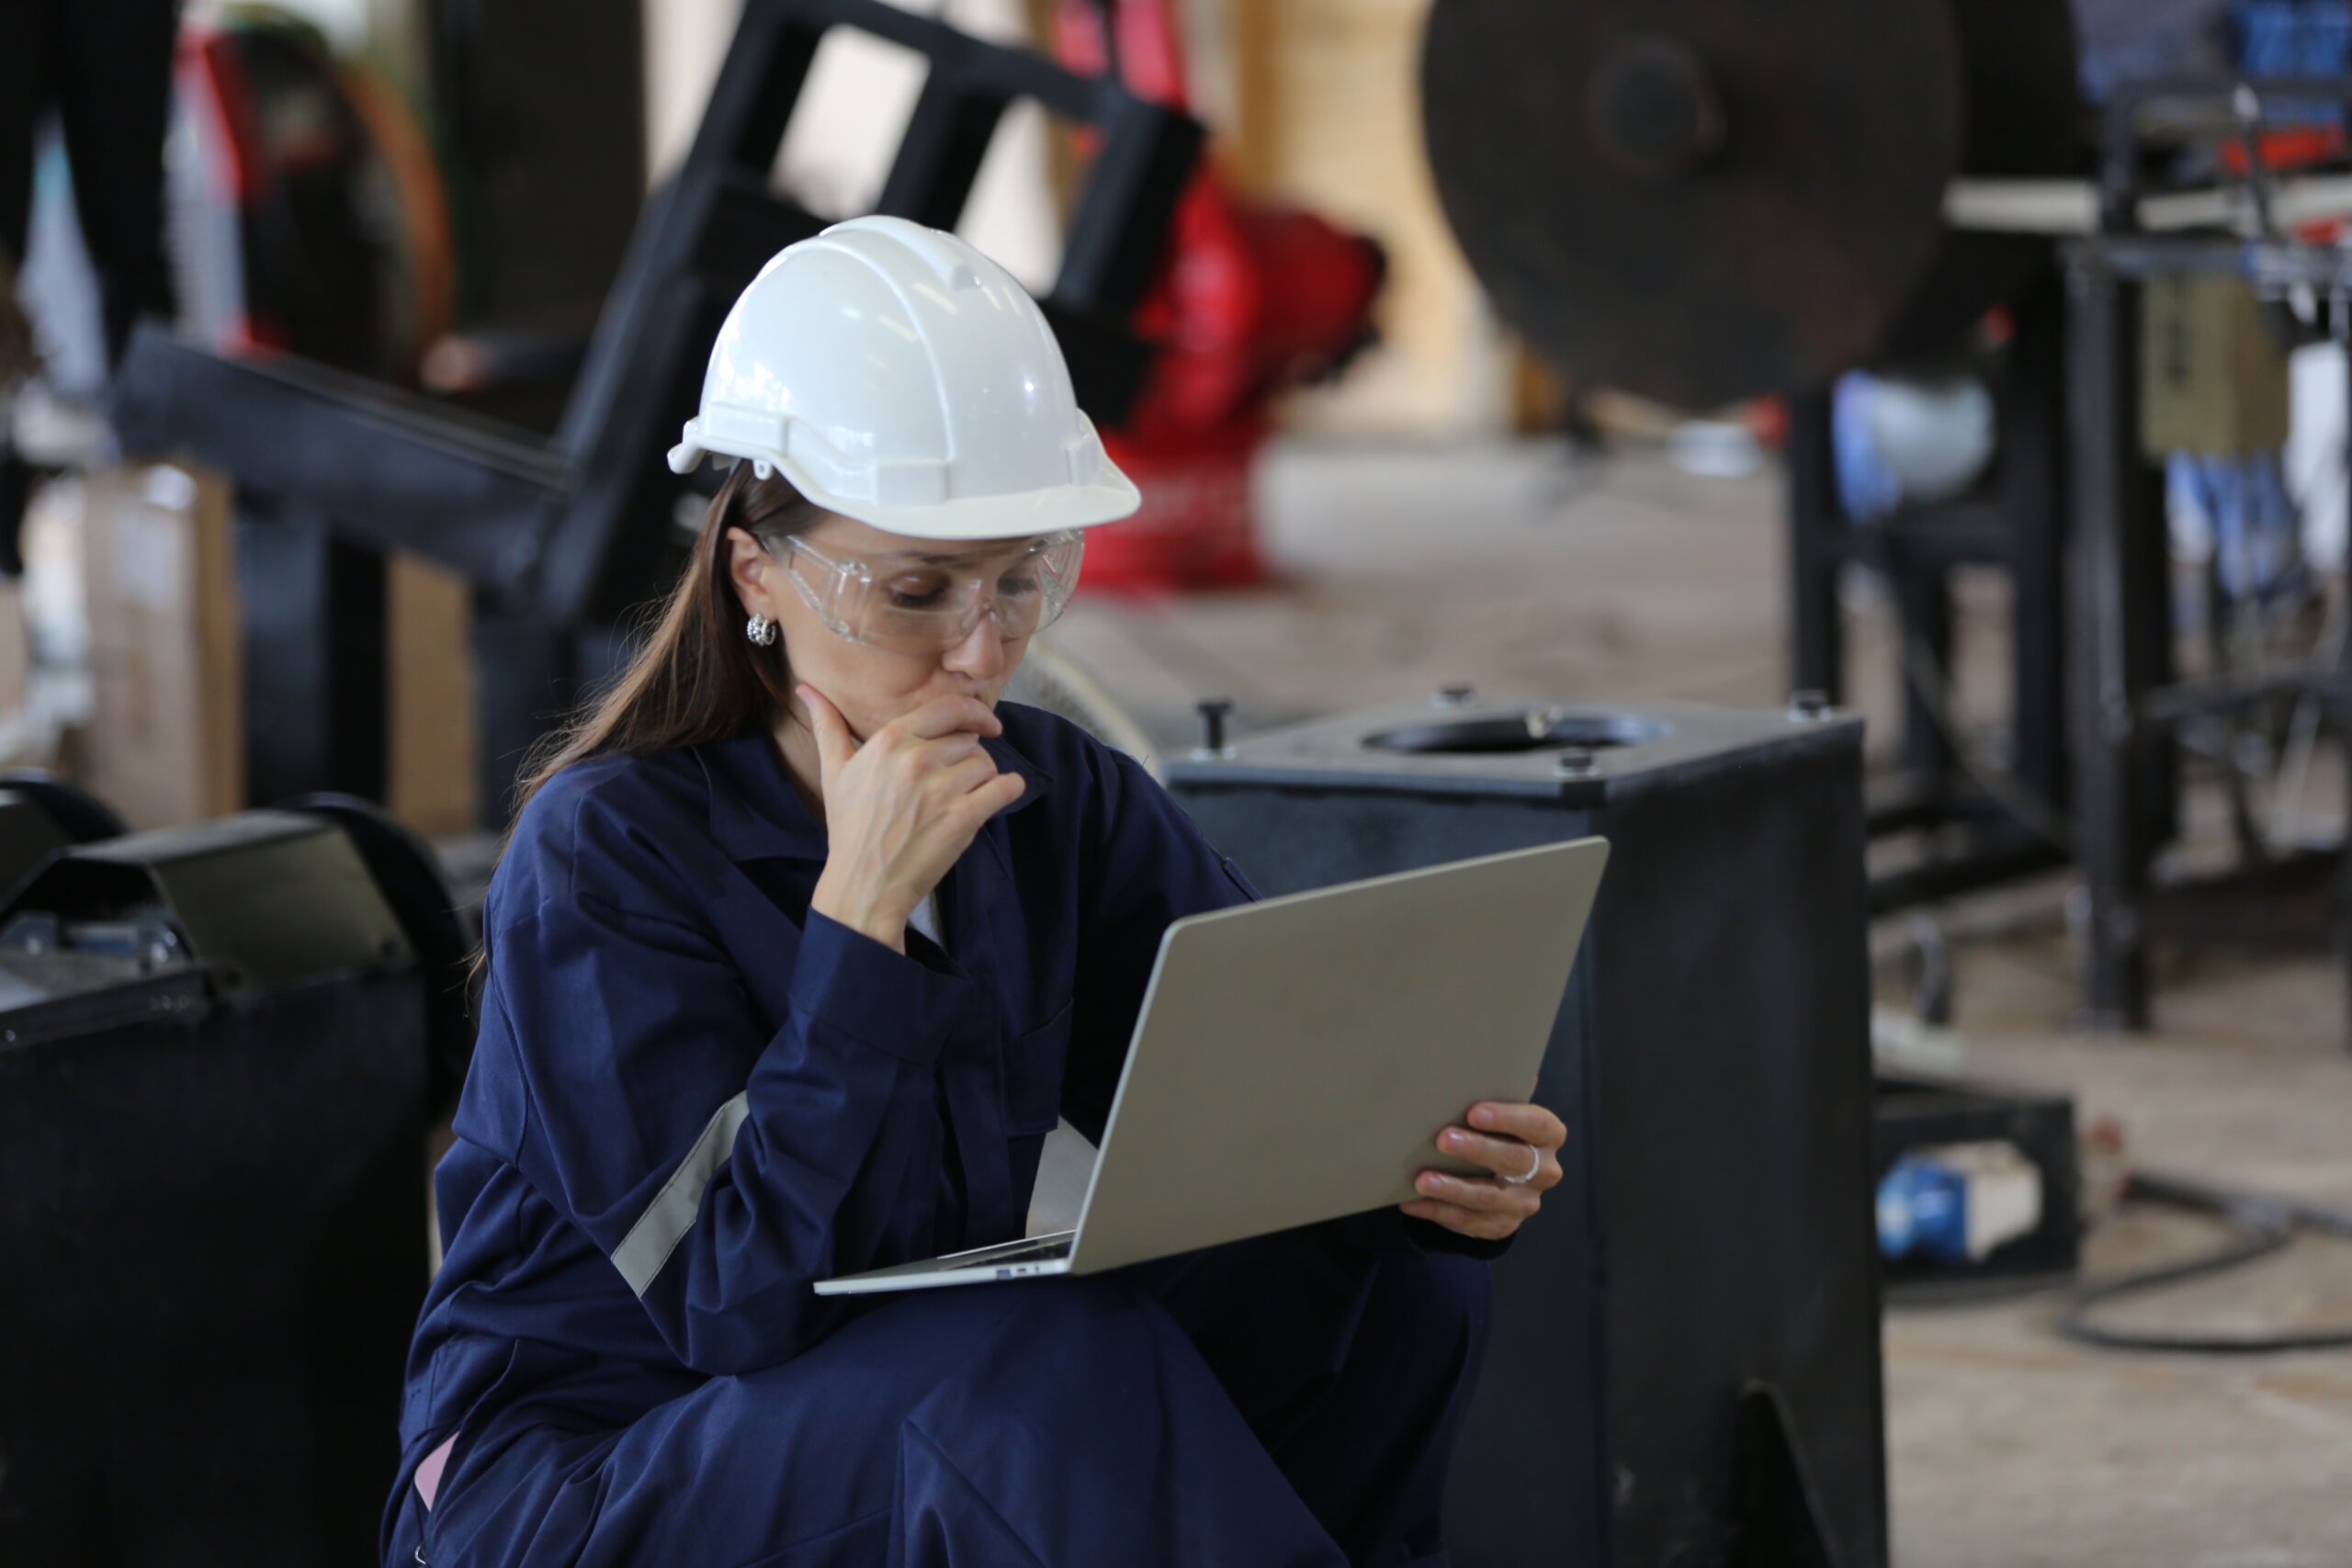 Female manufacturing professional wearing a hardhat and coveralls reviews content on a laptop in a manufacturing environment